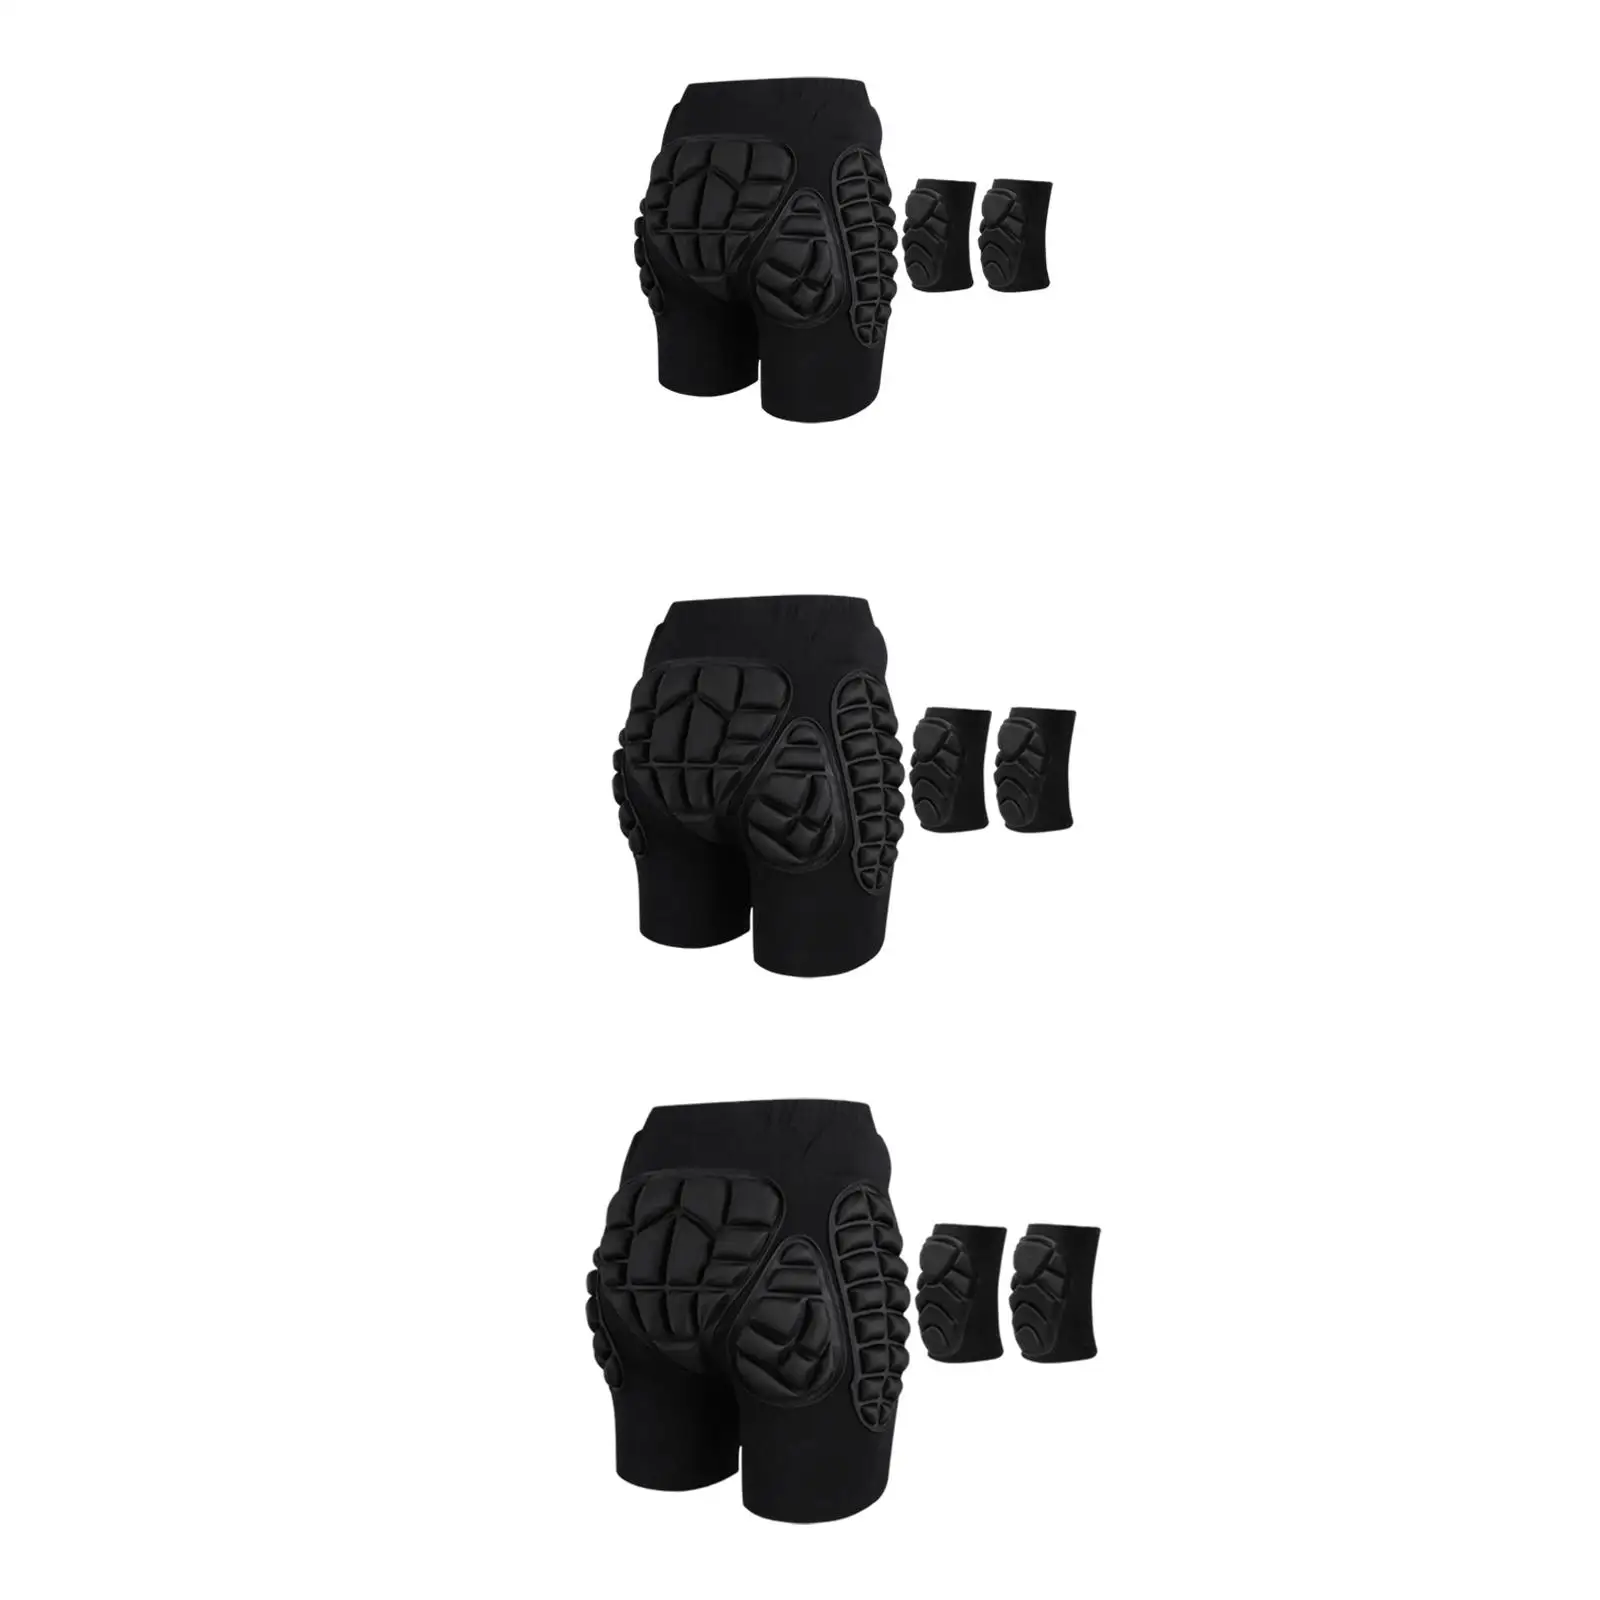 Padded Shorts with 1 Pair Knee Pads Tailbone  Protective Gear  Piece Hip Pad Butt Pad  Pad for Snowboarding